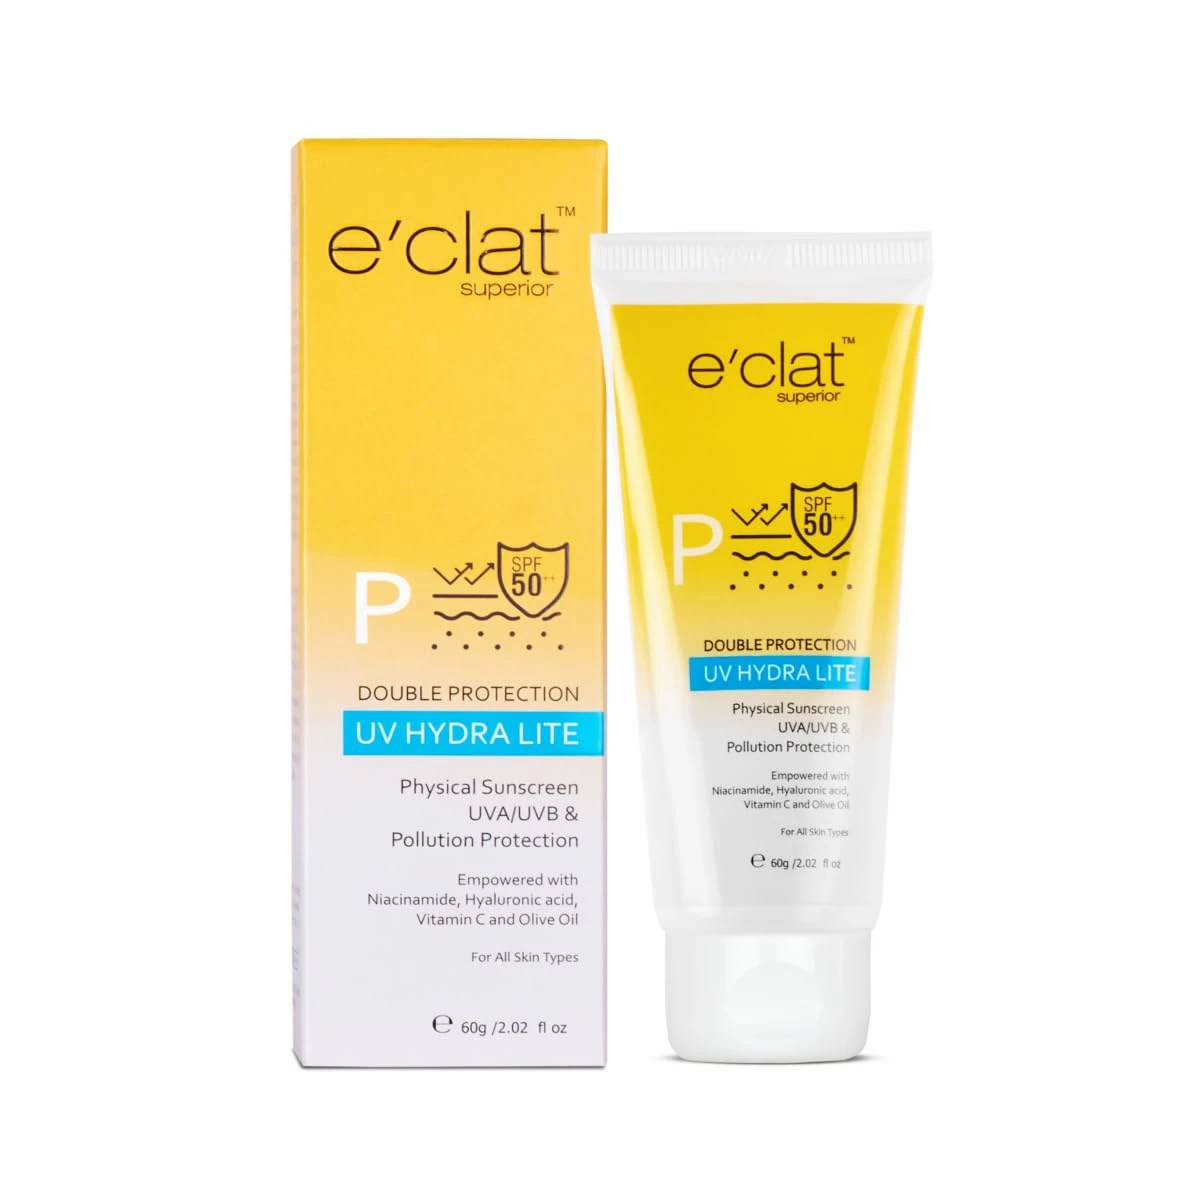 e'clat Superior UV Hydra Lite Physical Sunscreen, SPF 50+ I Infused with Hyaluronic acid, Niacinamide & Vitamin C I For Dry and Sensitive Skin I 60gm.